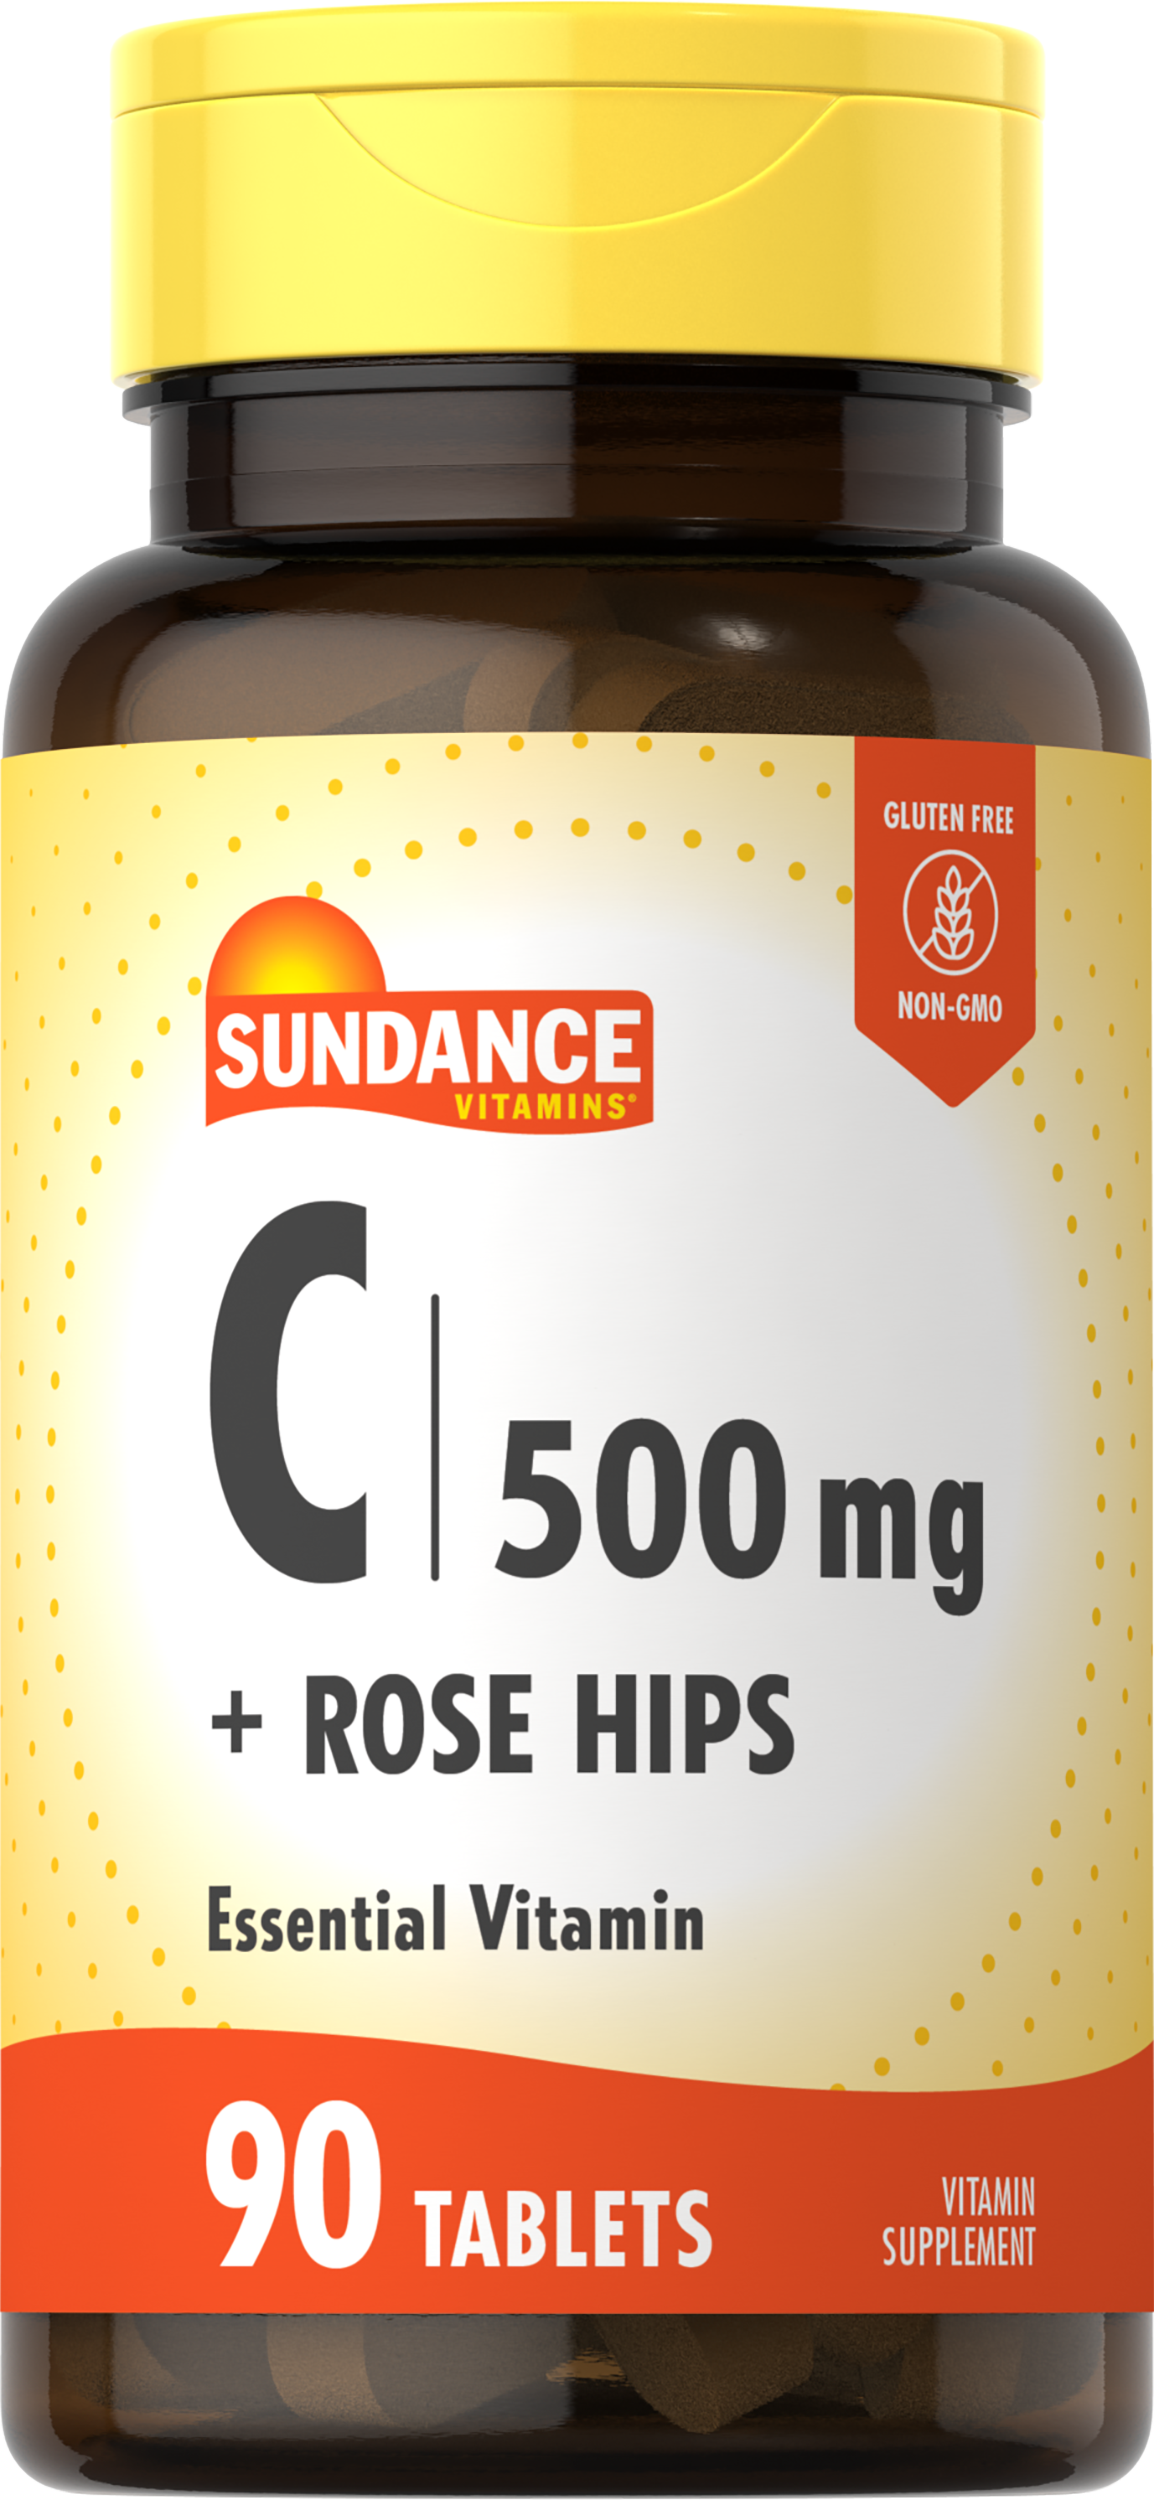 Vitamin C 500mg with Rose Hips